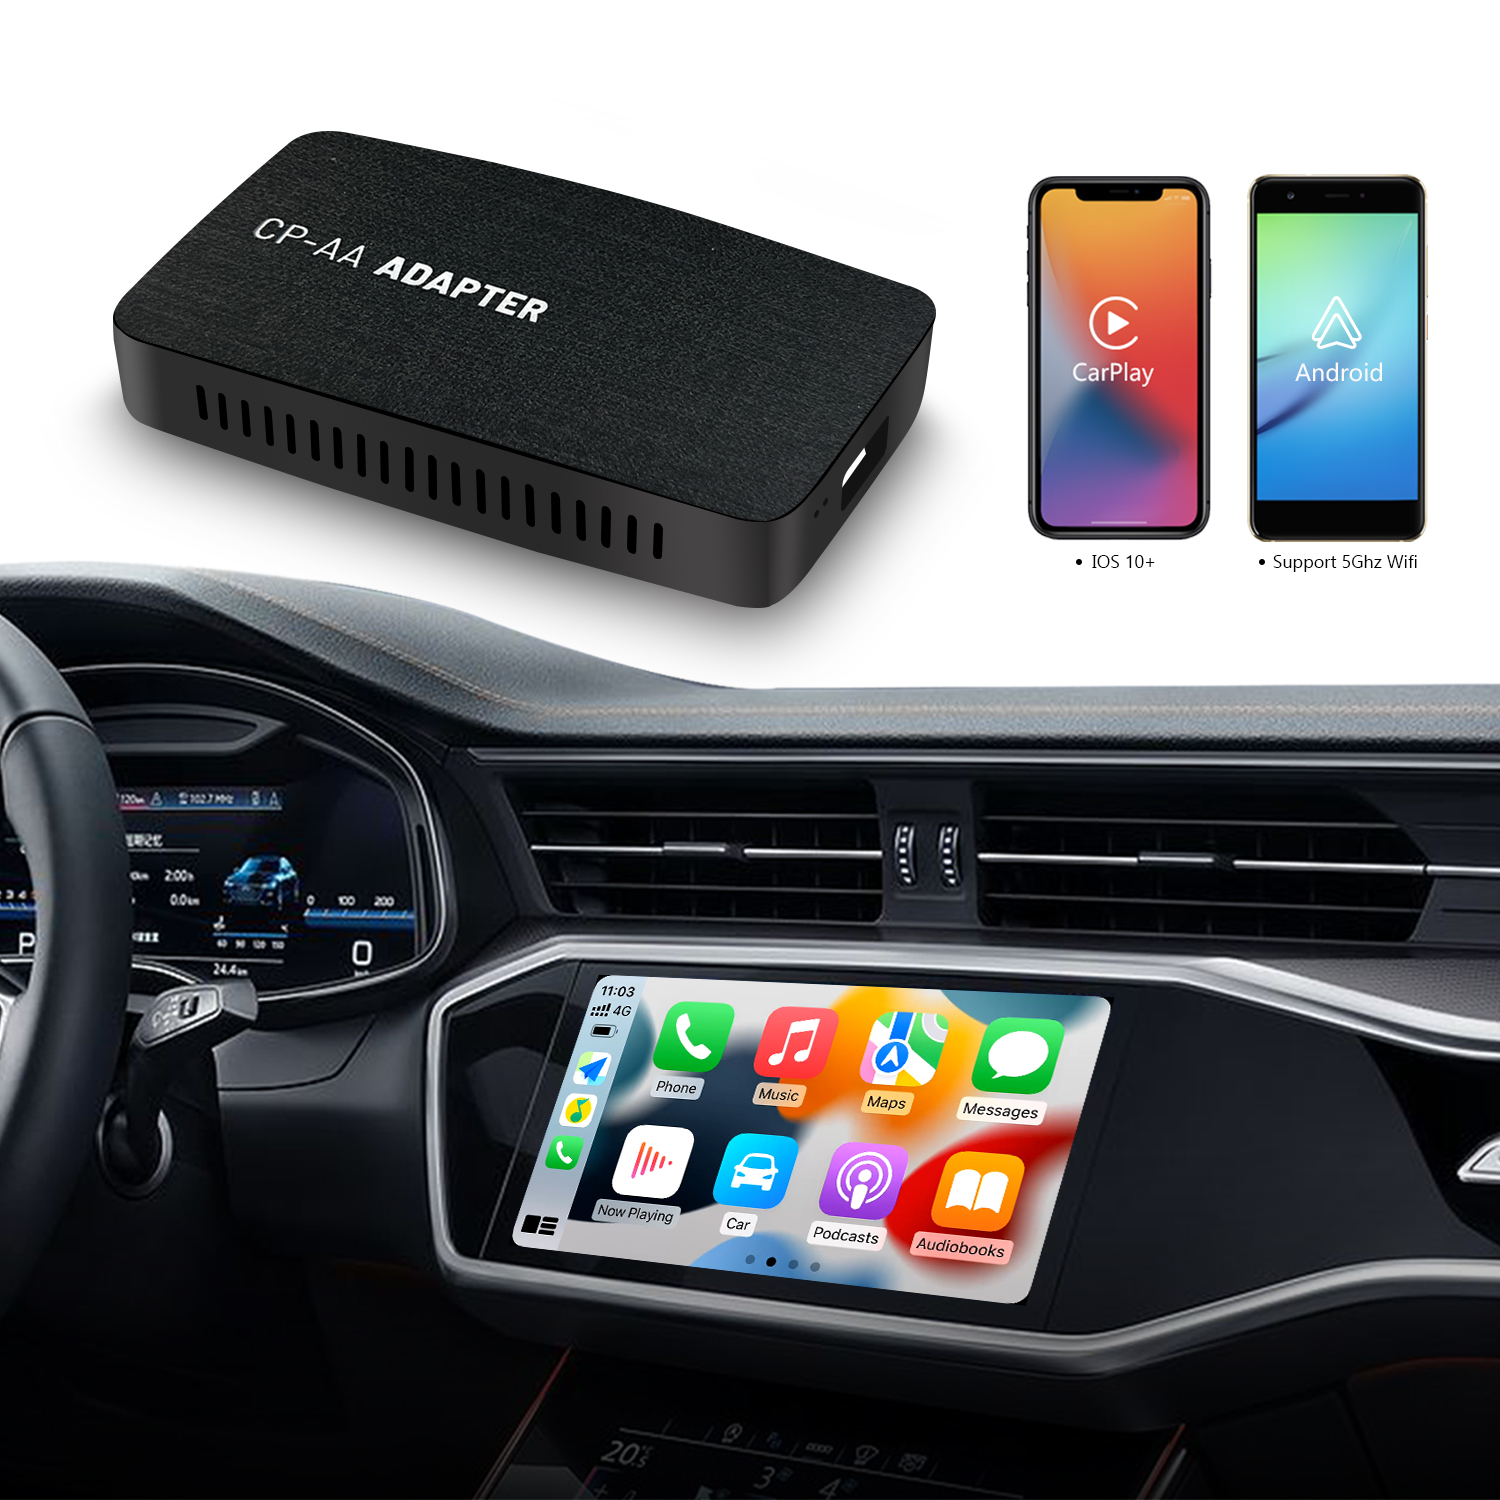 2-in-1 Wired to Wireless Android Auto And Wireless CarPlay Smartbox Adapter For OEM car stereo | USB plug and play AAwireless auto module